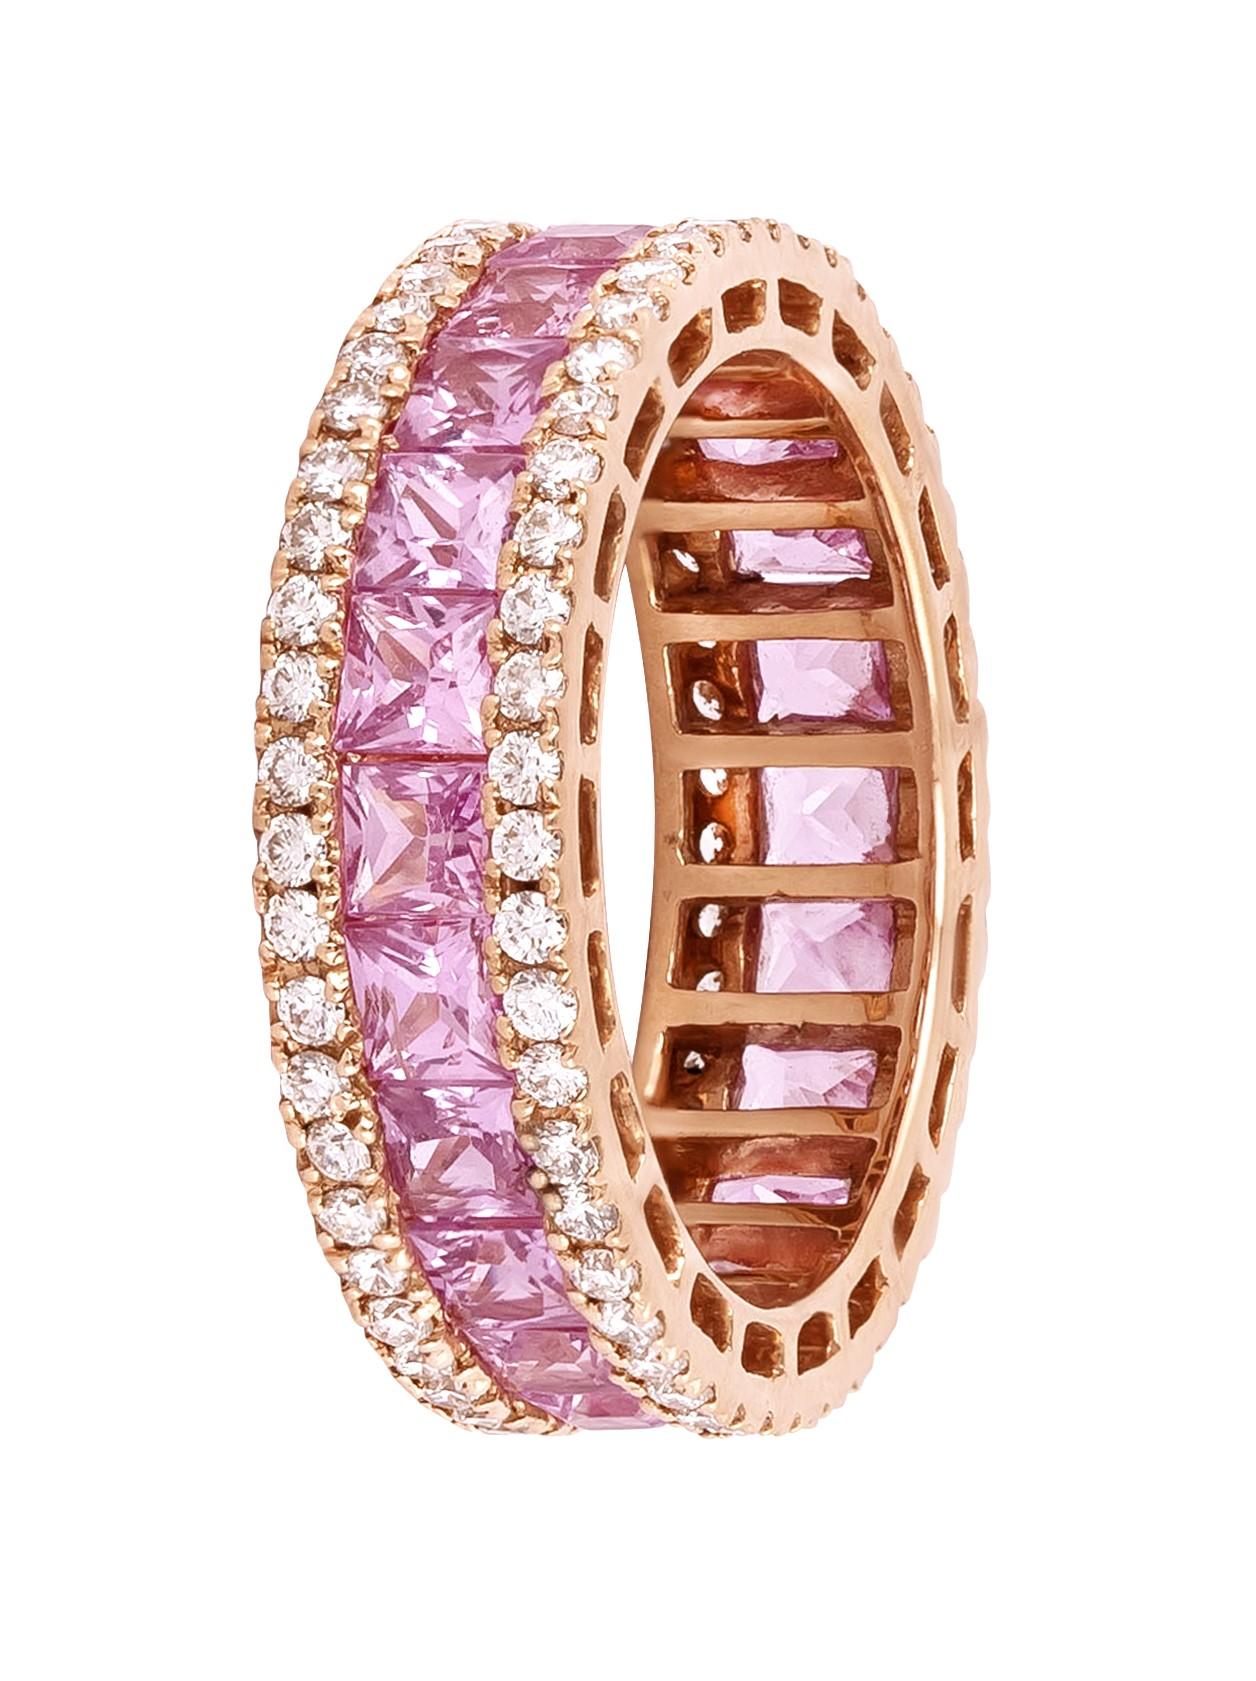 18 Karat Gold 4.05 Carat Diamond and Pink Sapphire Eternity Cocktail Ring  For Sale 1